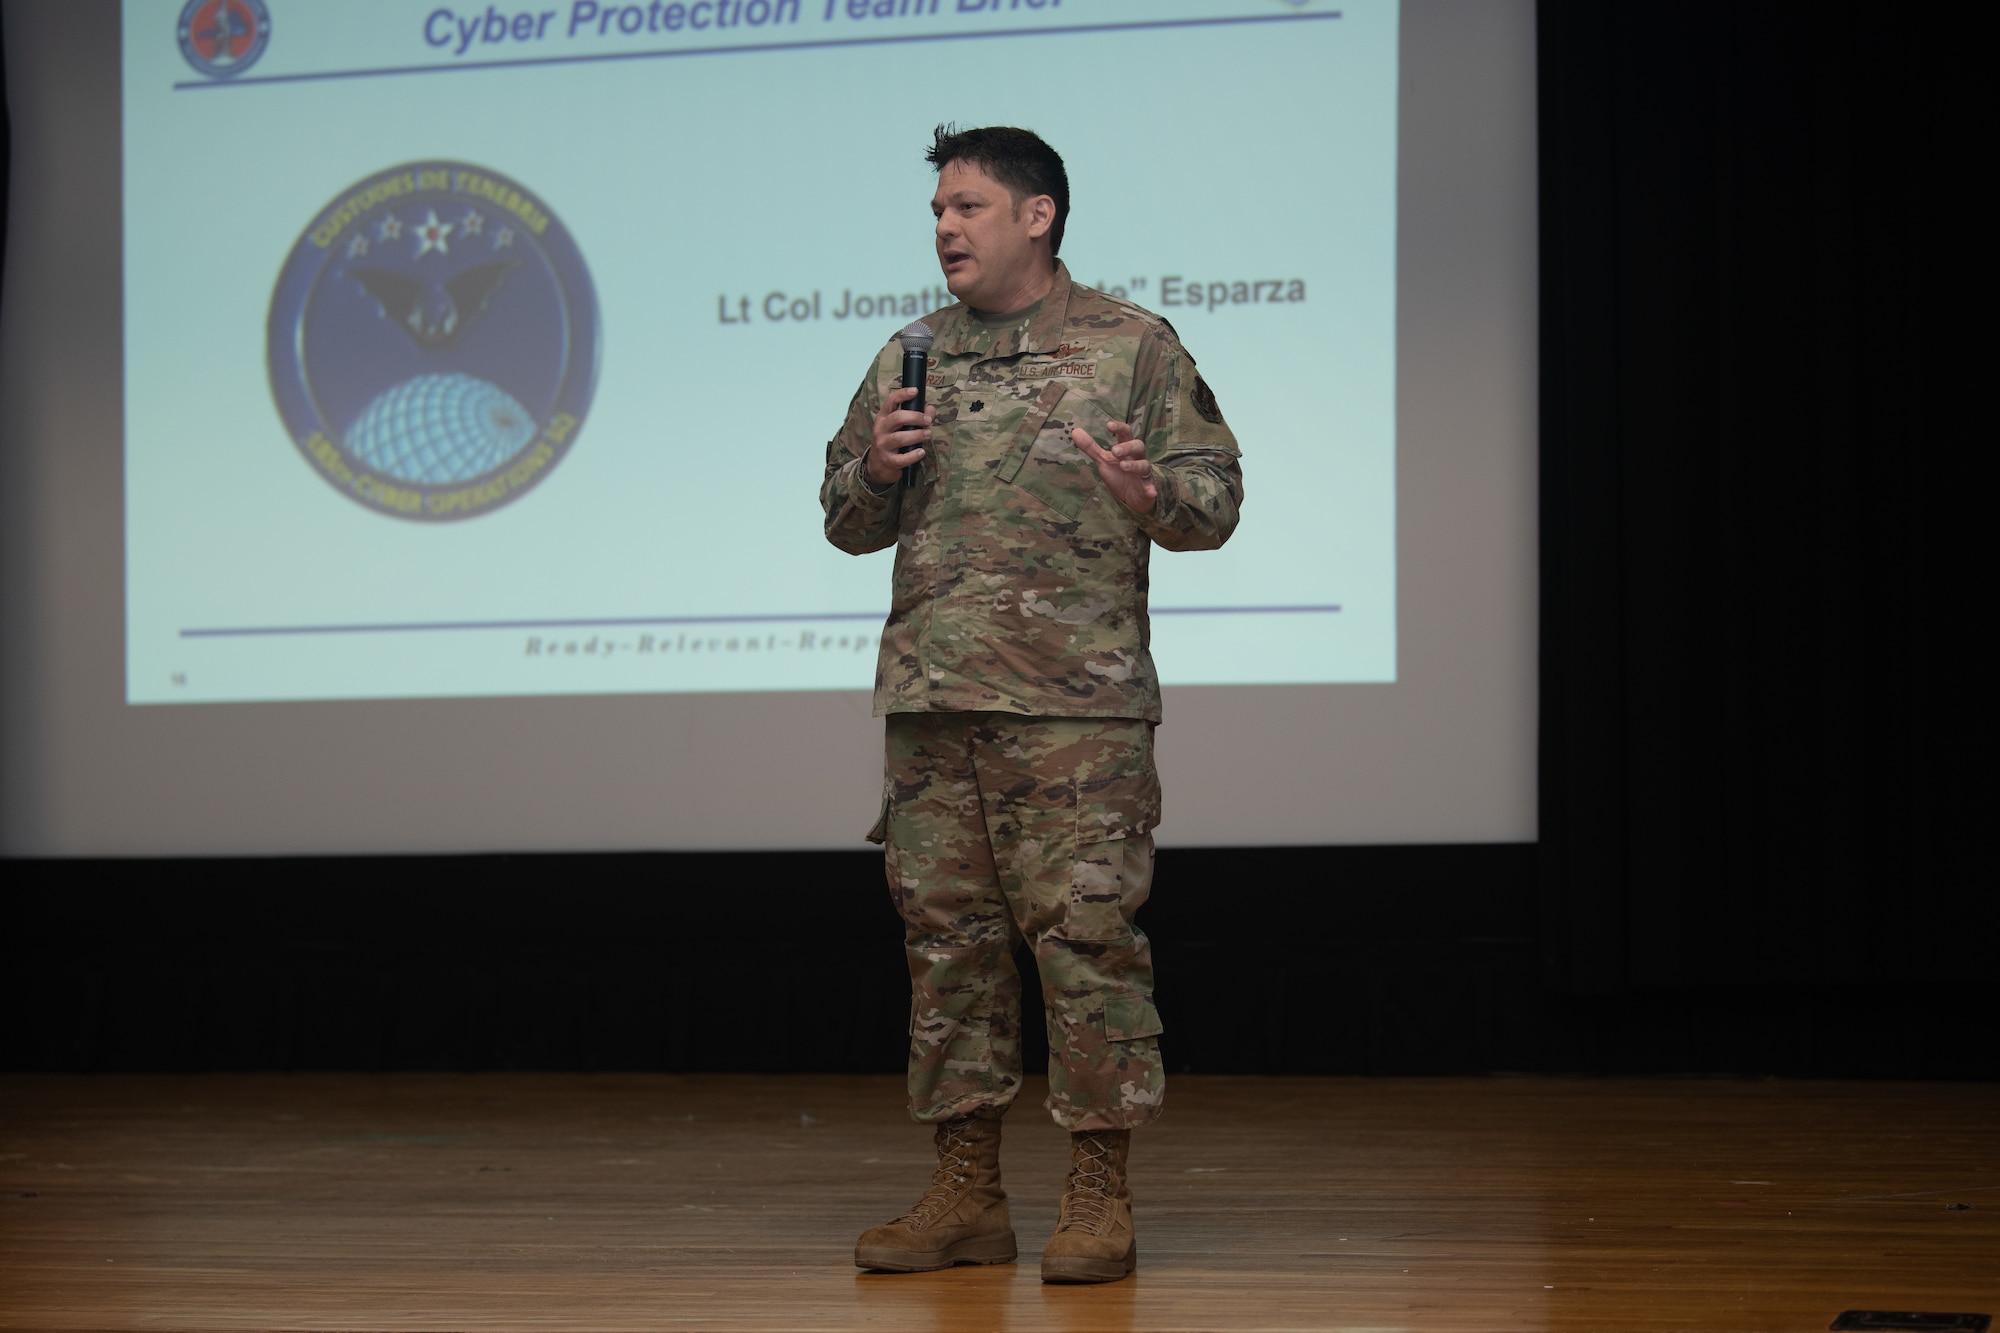 Lt. Col. Jonathan Esparza, 192nd Cyberspace Operations Squadron commander, speaks on stage.